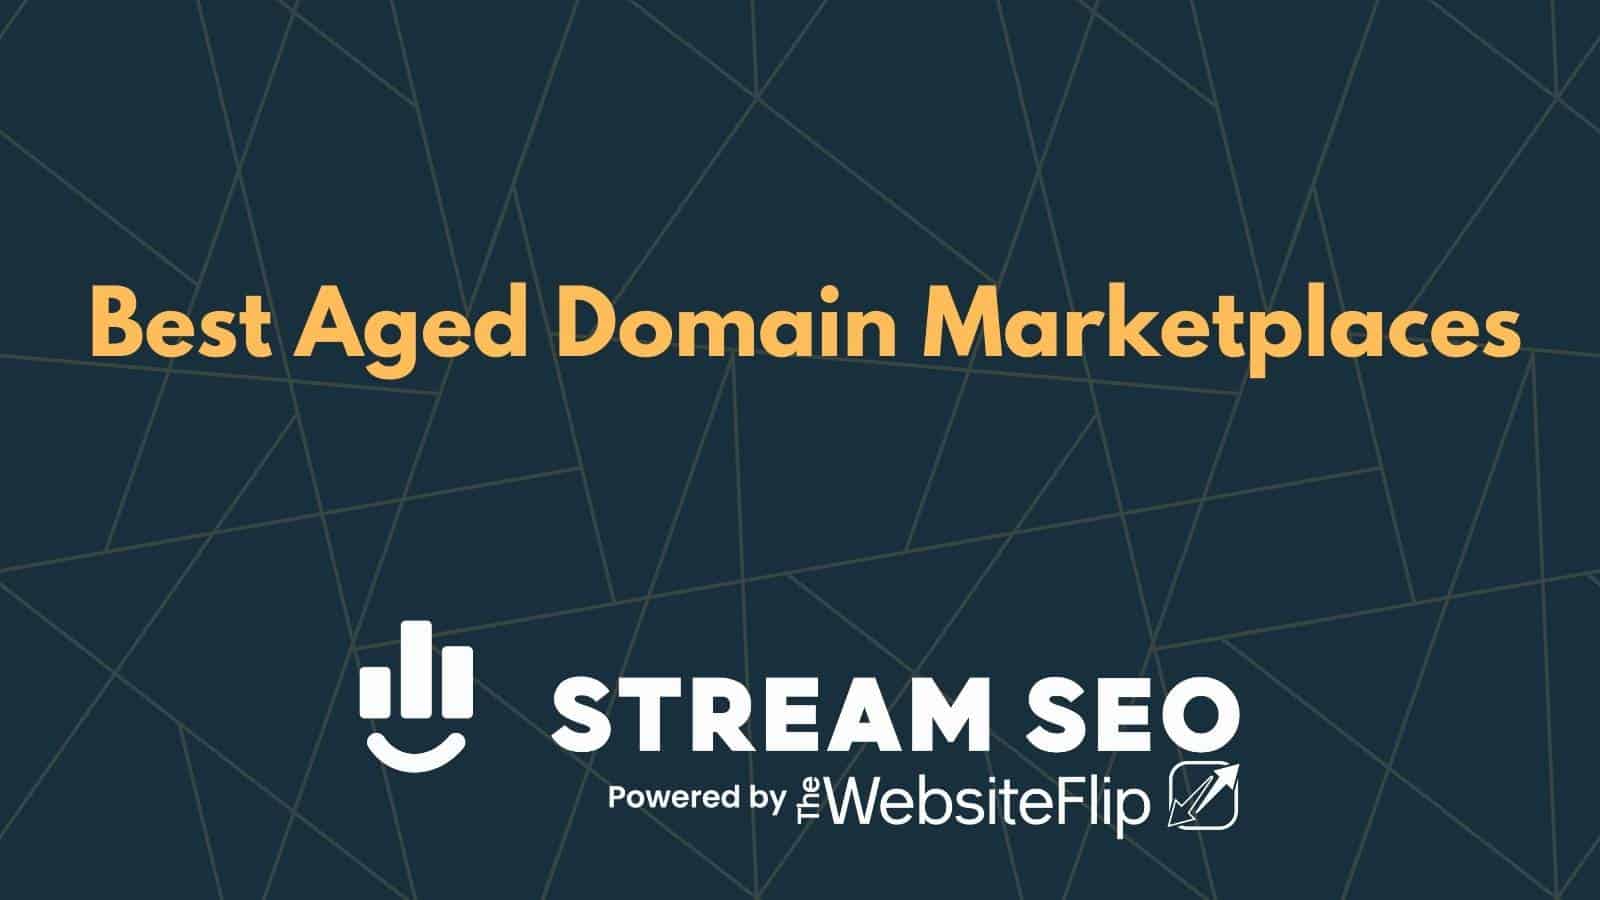 Best Aged Domain Marketplaces